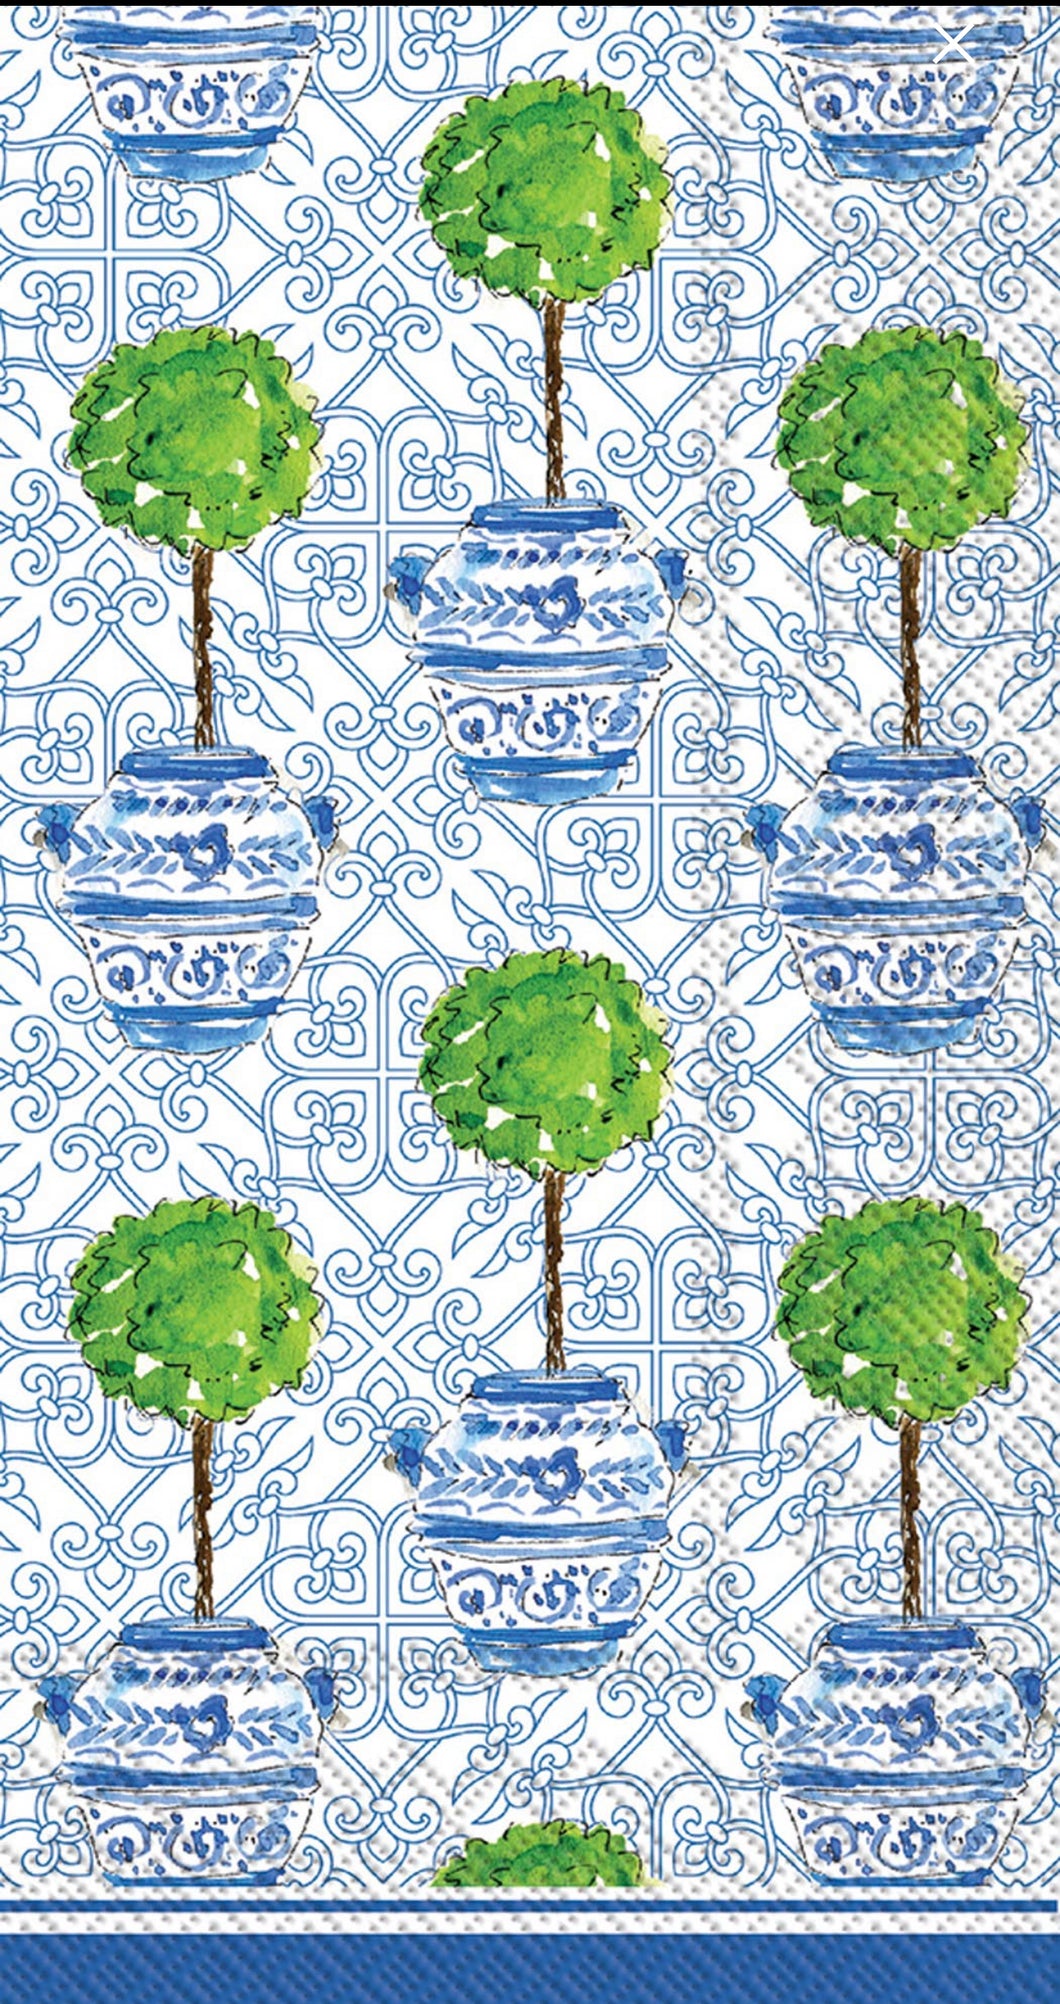 Blue topiary - Guest Napkins - pack of 20